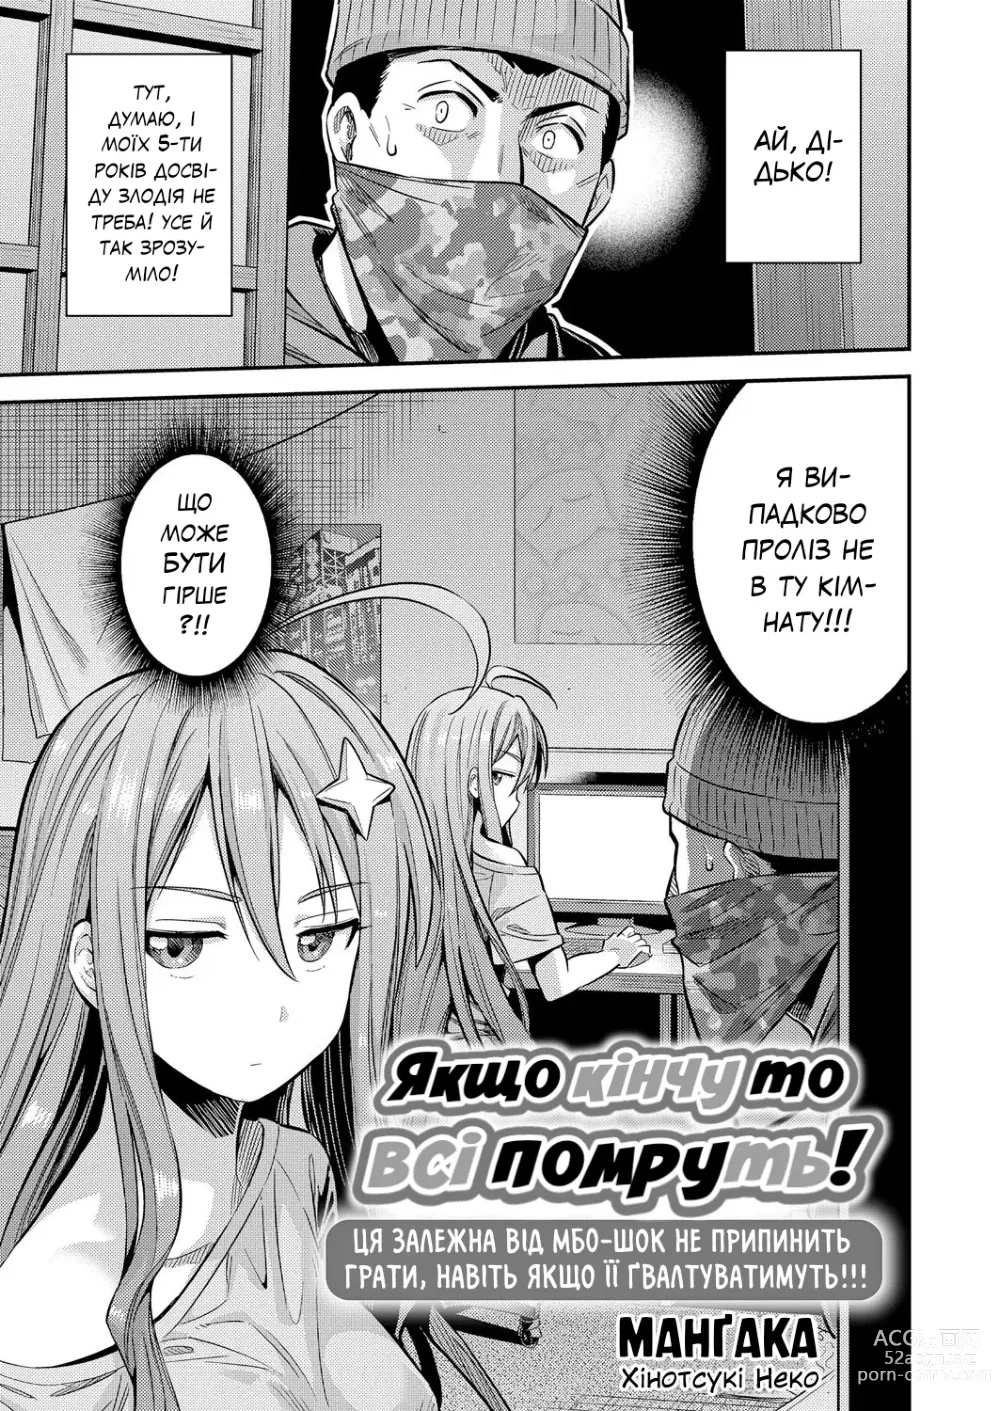 Page 1 of manga If I Cum, Everyone Will Die!! [Uncensored]